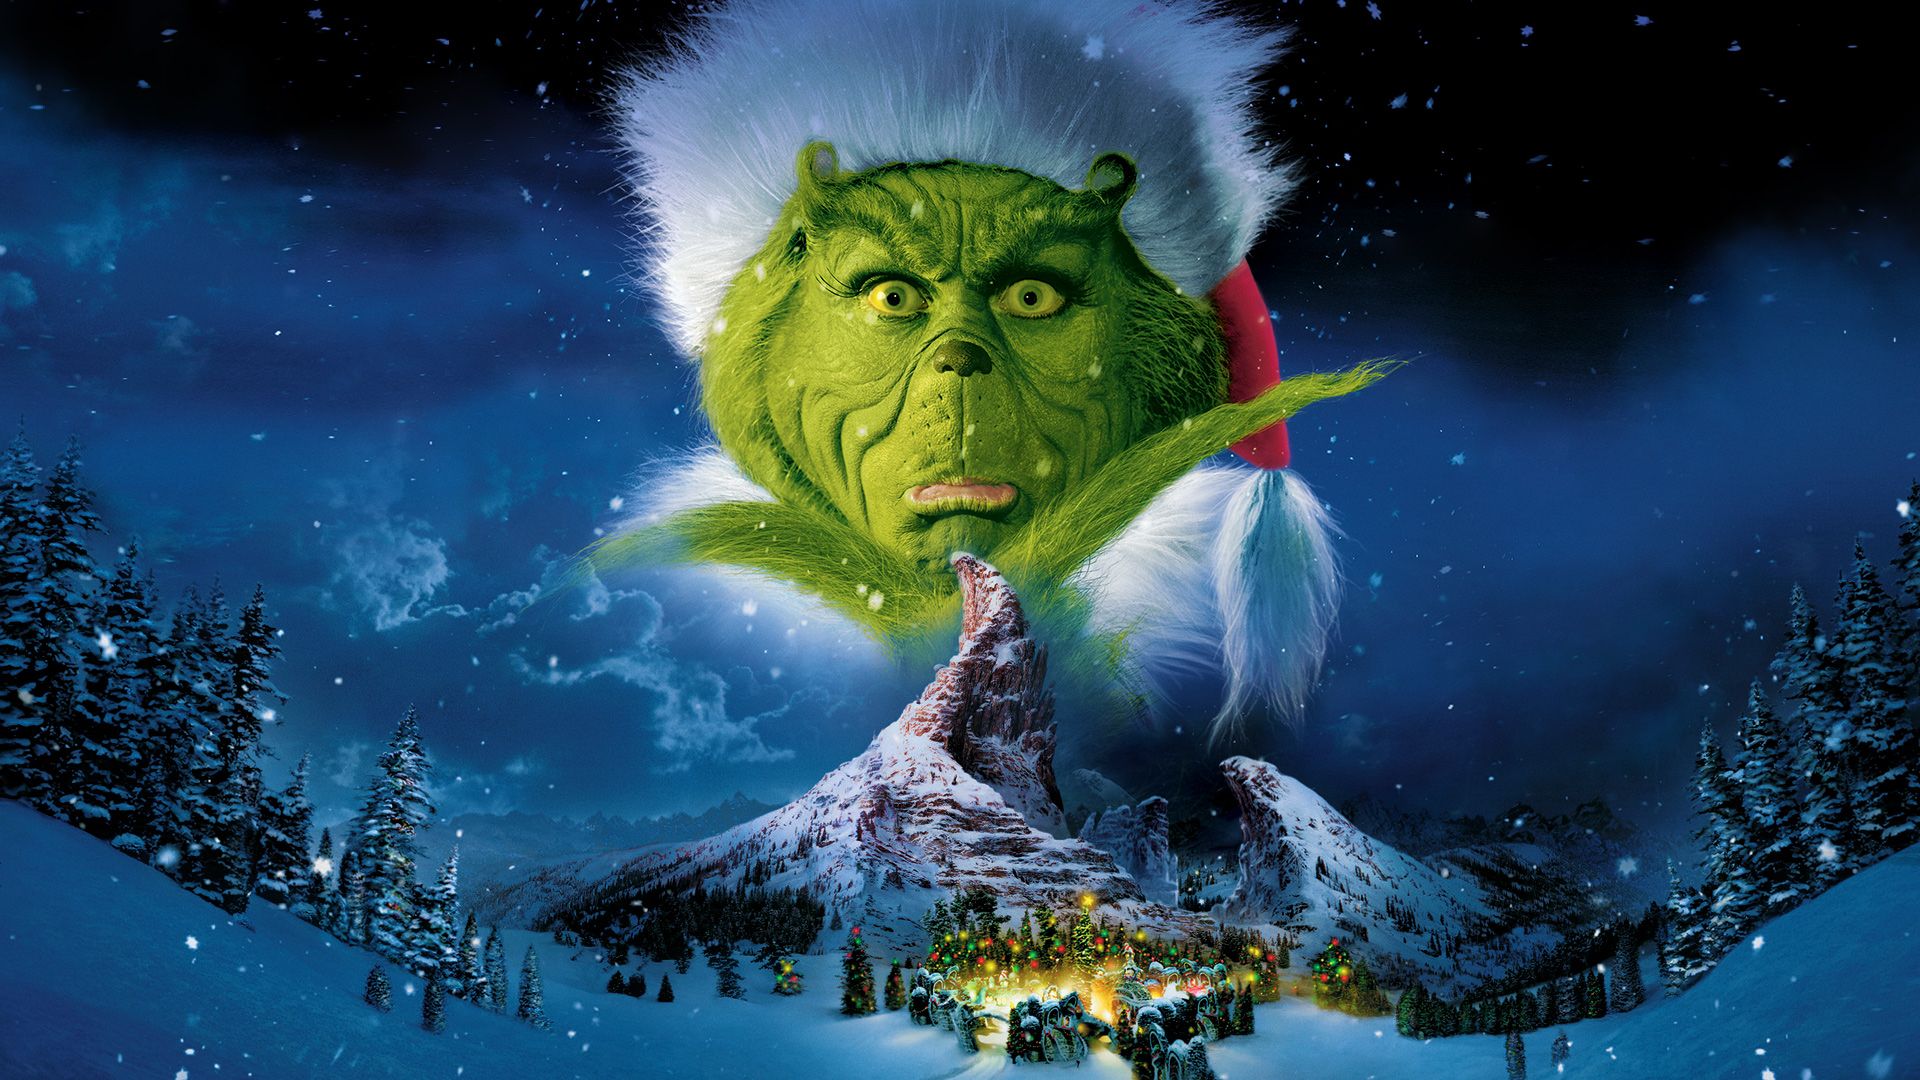 The Grinch background